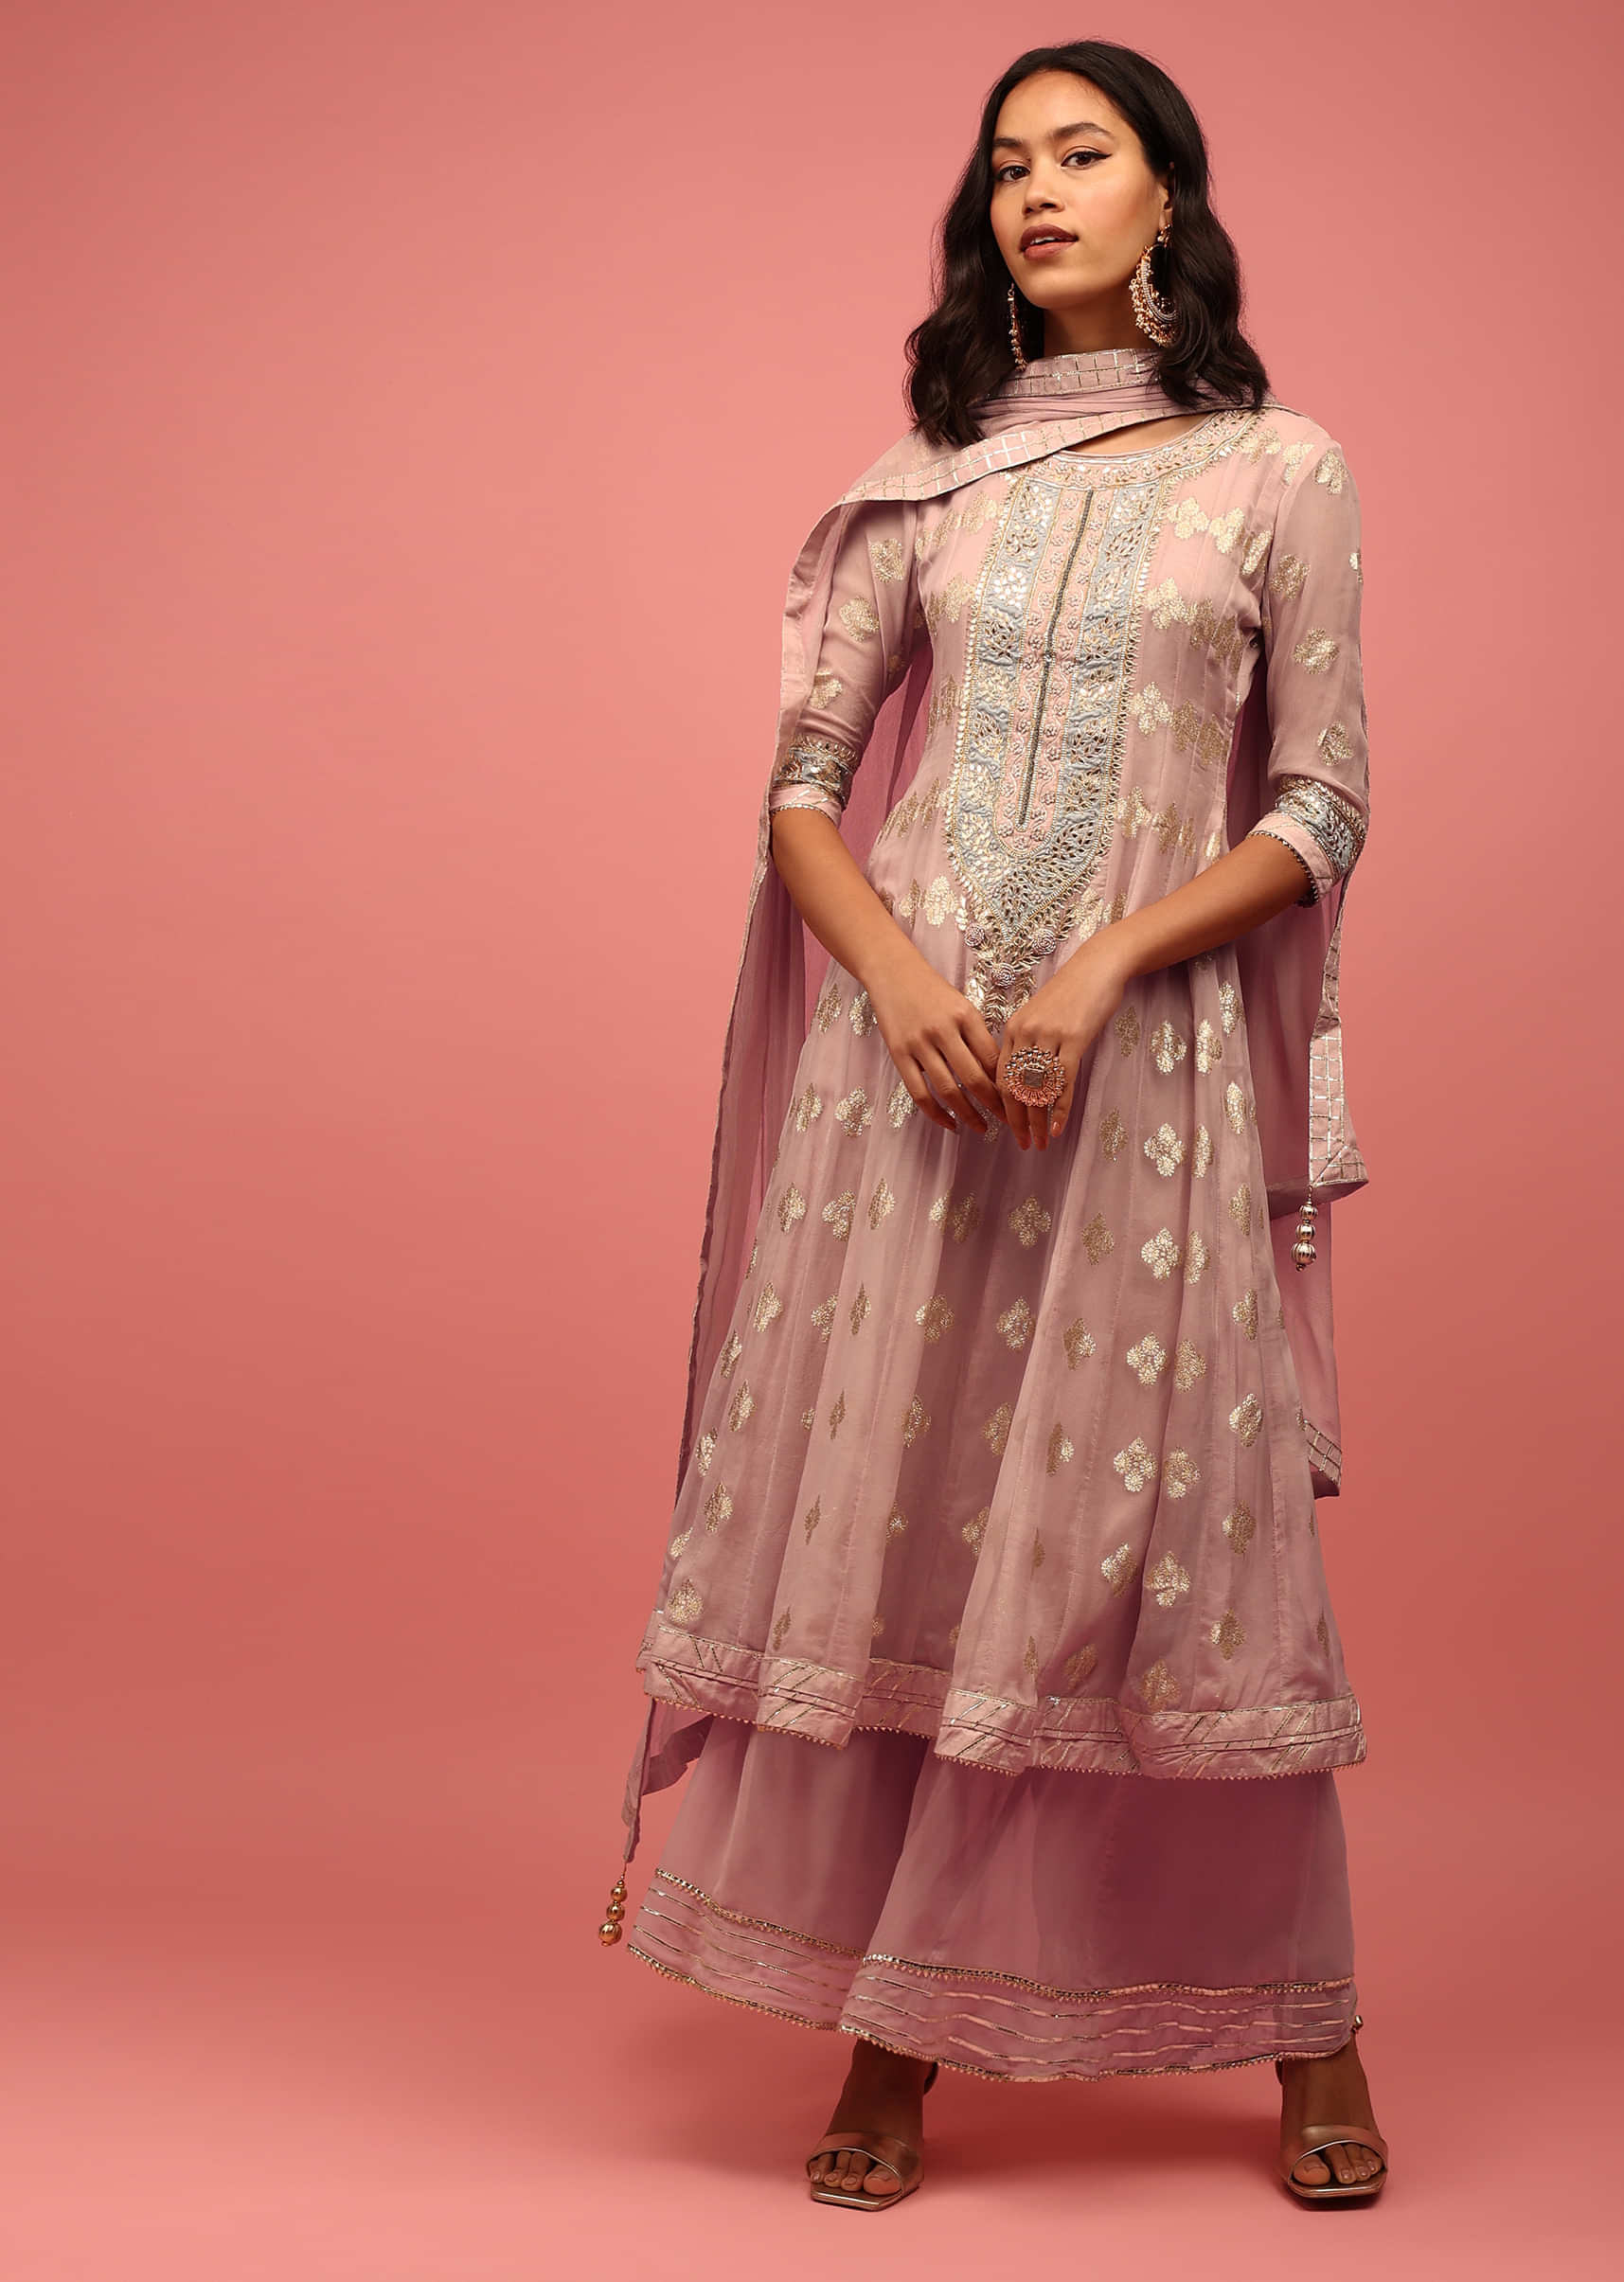 Pale Lilac Anarkali Suit In Banarasi Georgette Brocade Work, Handcrafted With Moti And Sequins